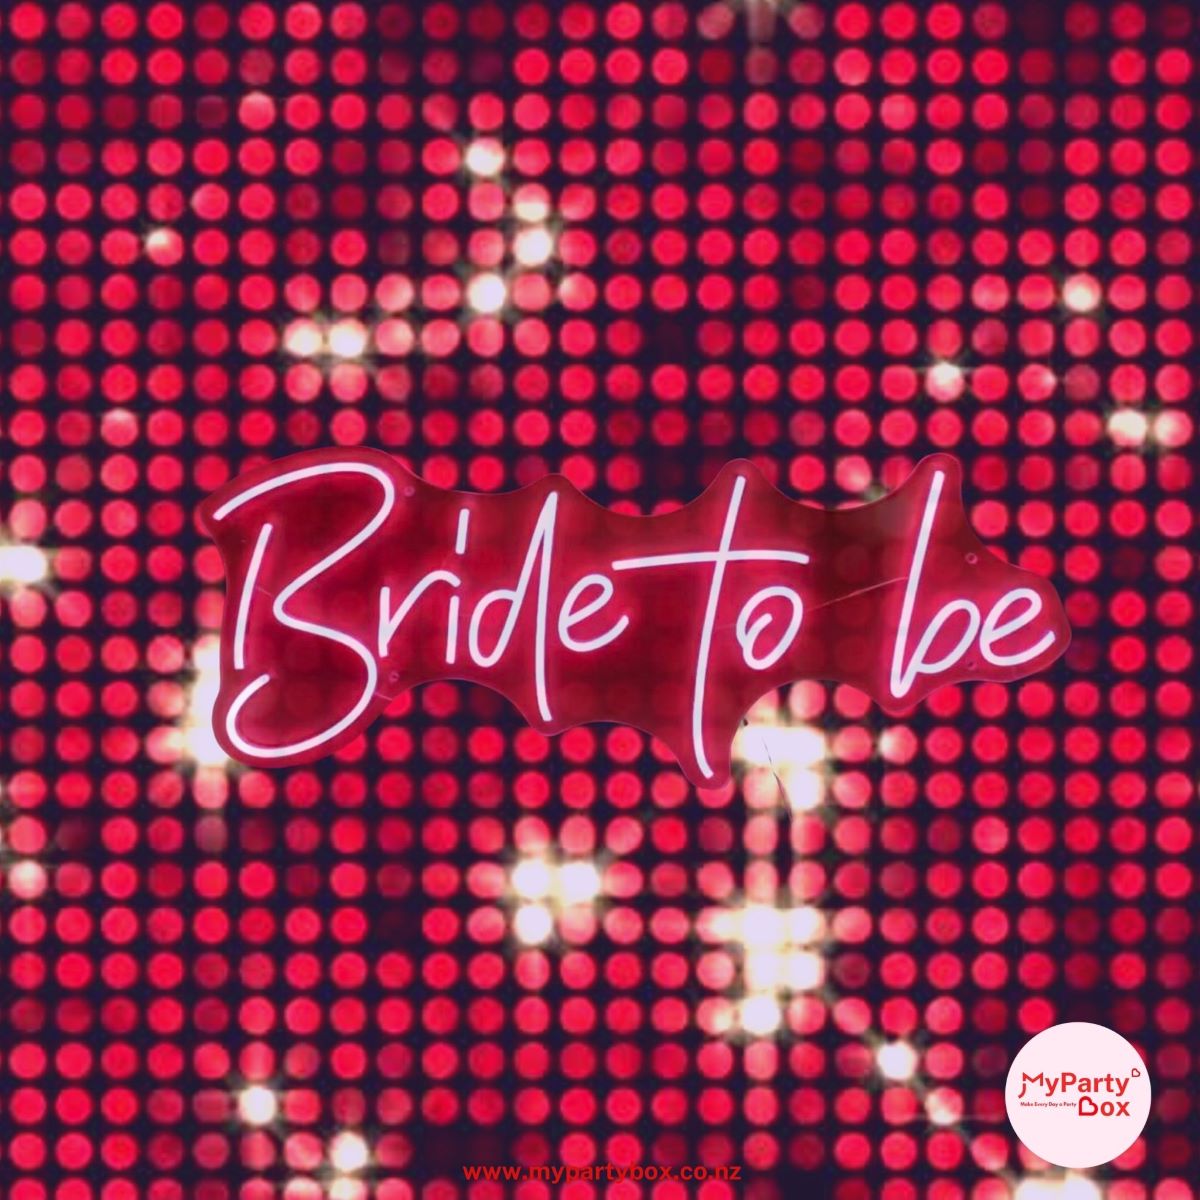 Bride To Be Neon Light